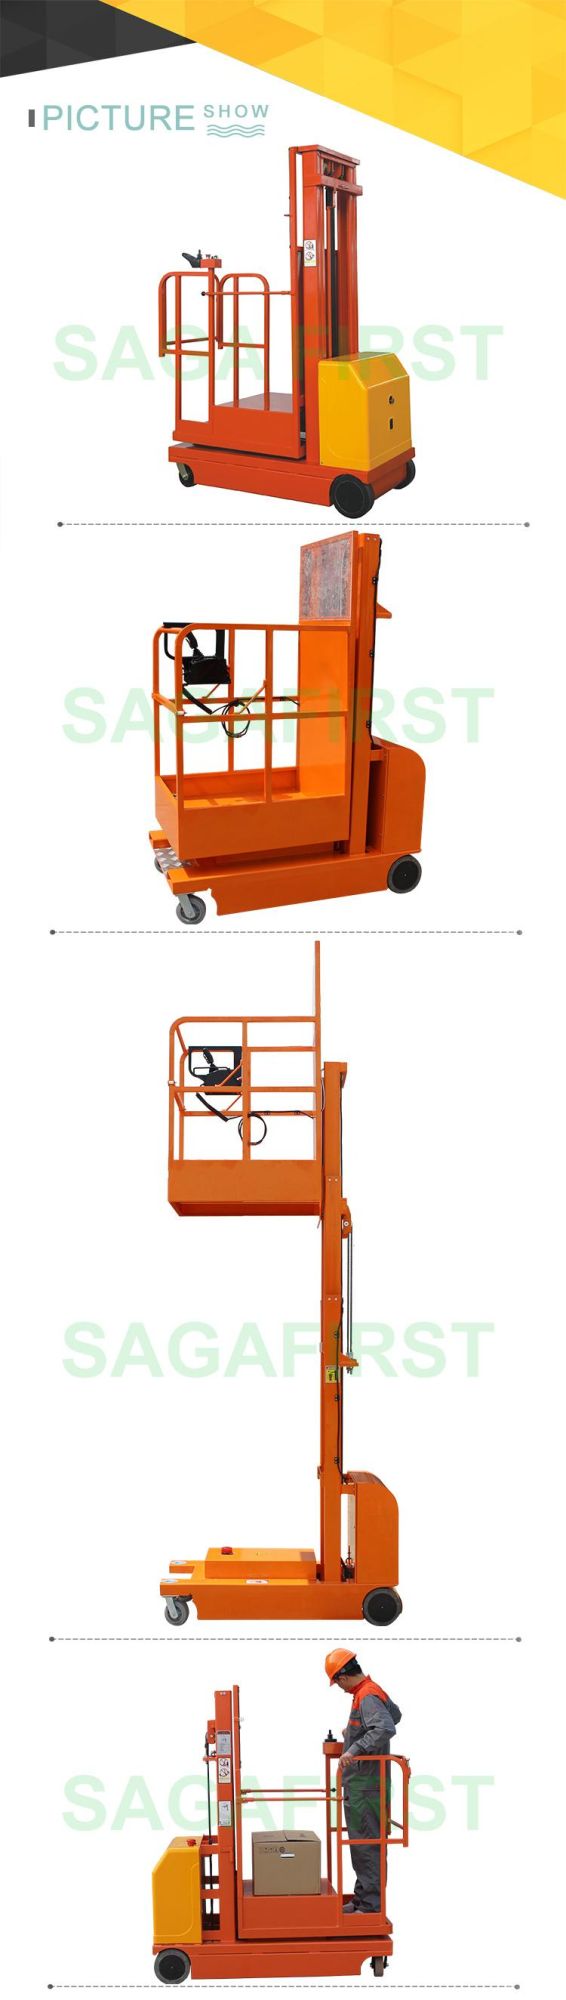 Portable Lift Table Aerial Full Electric Order Picker Supply